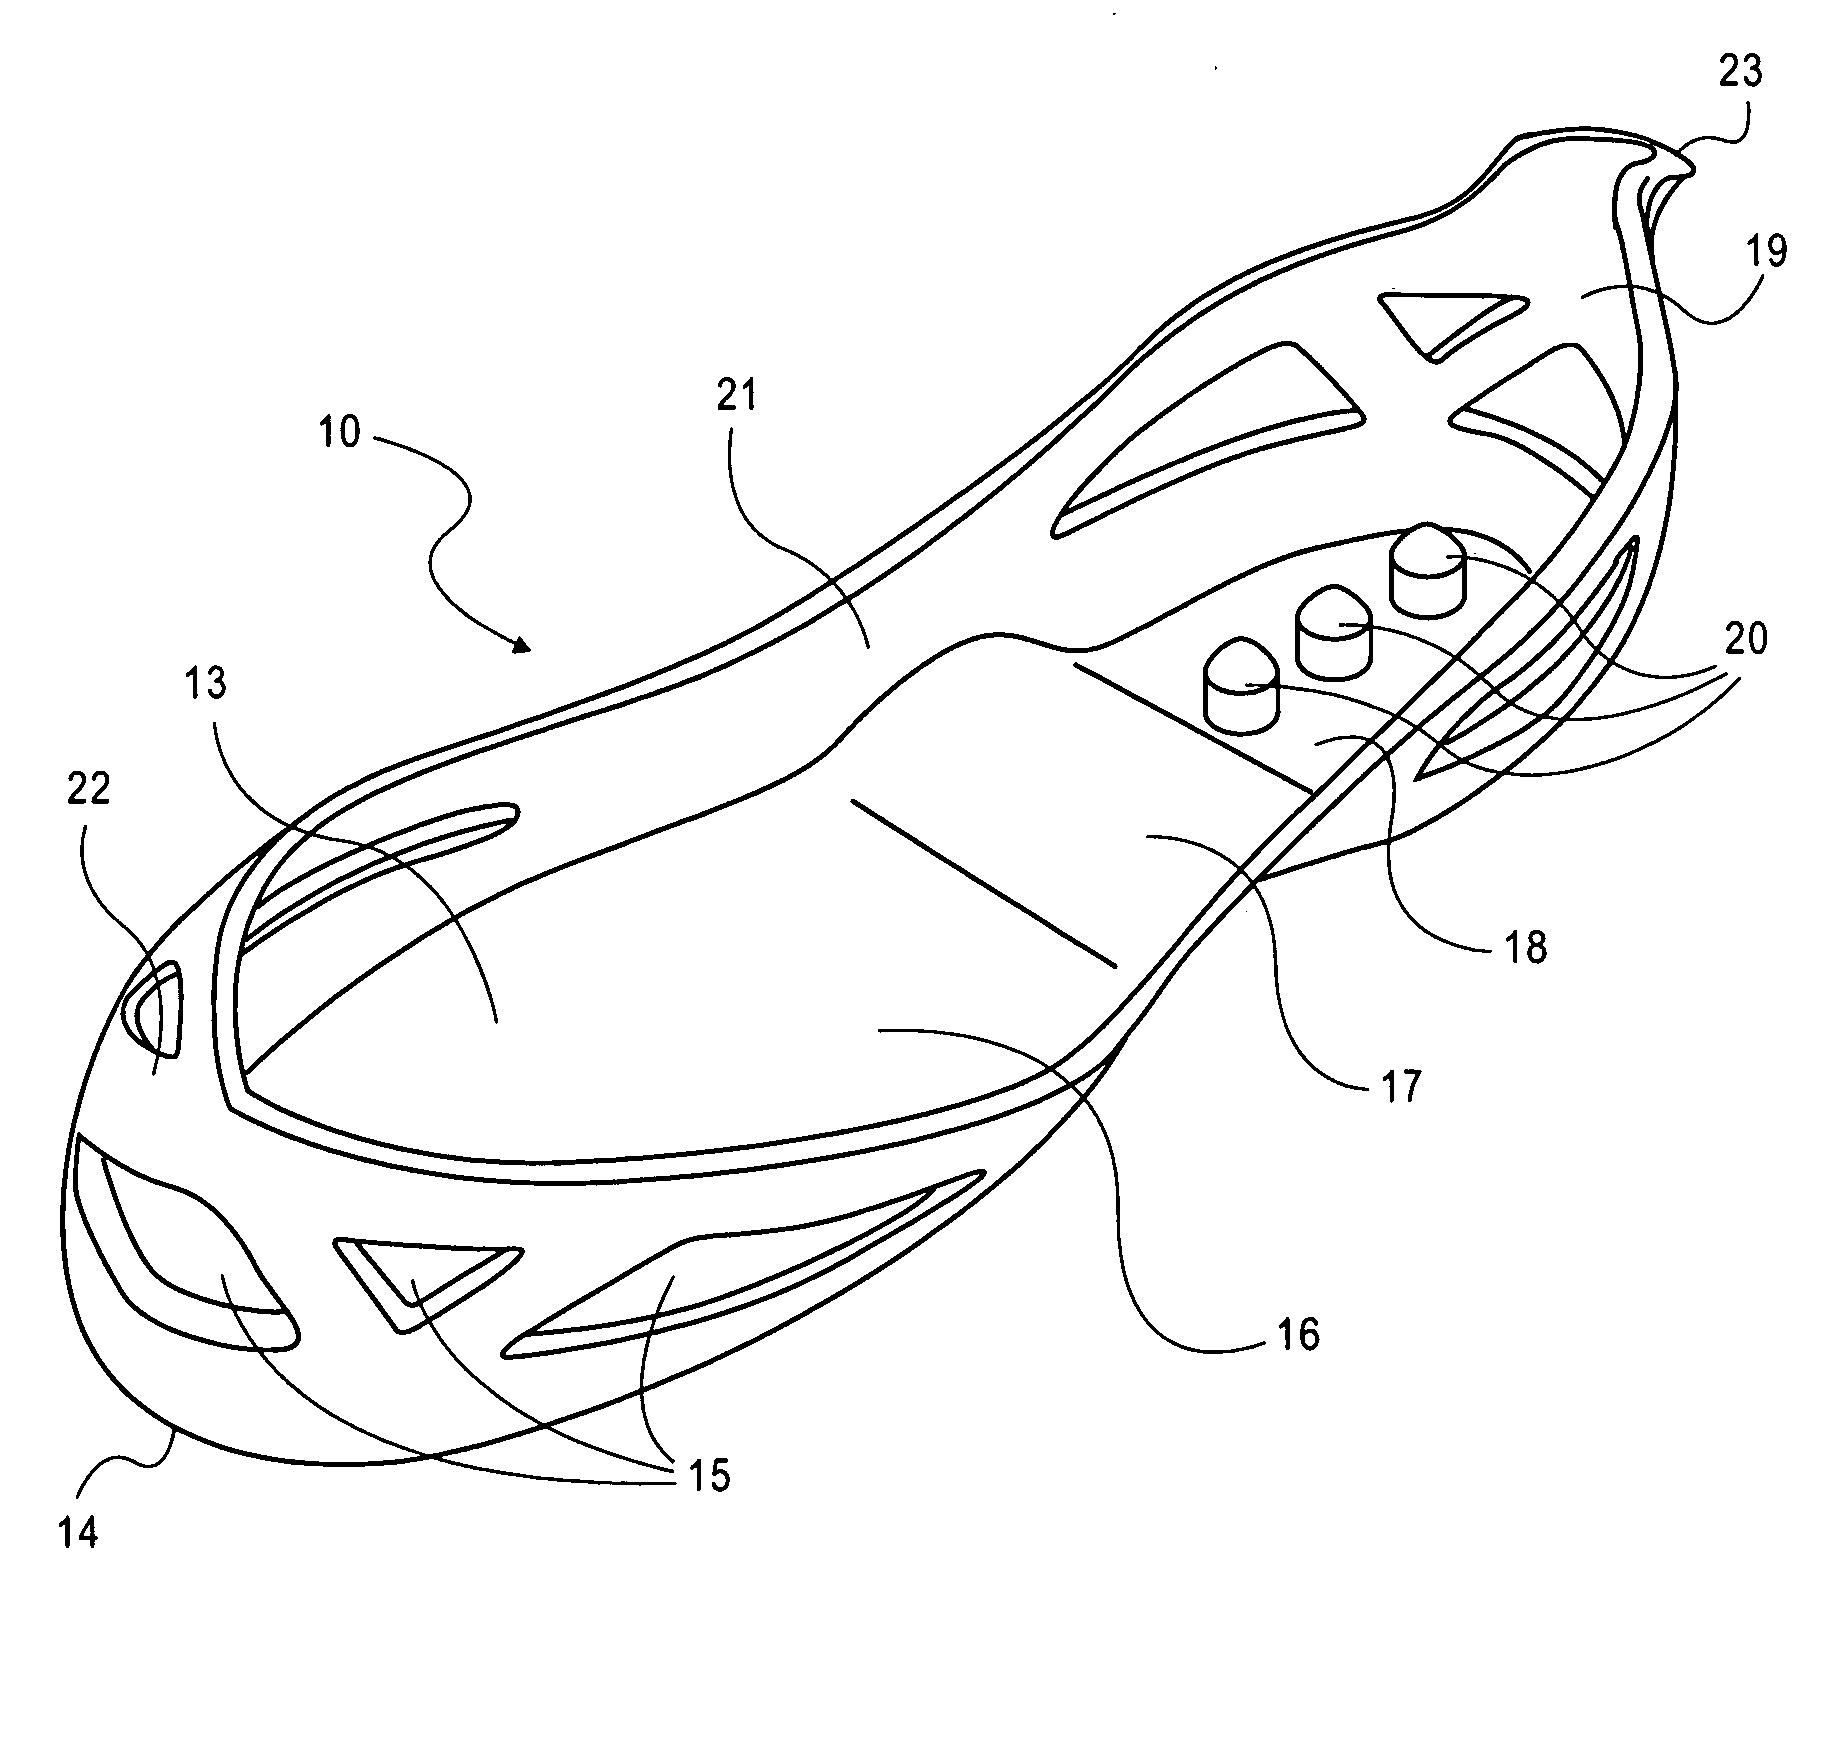 Overshoe for athletic shoes